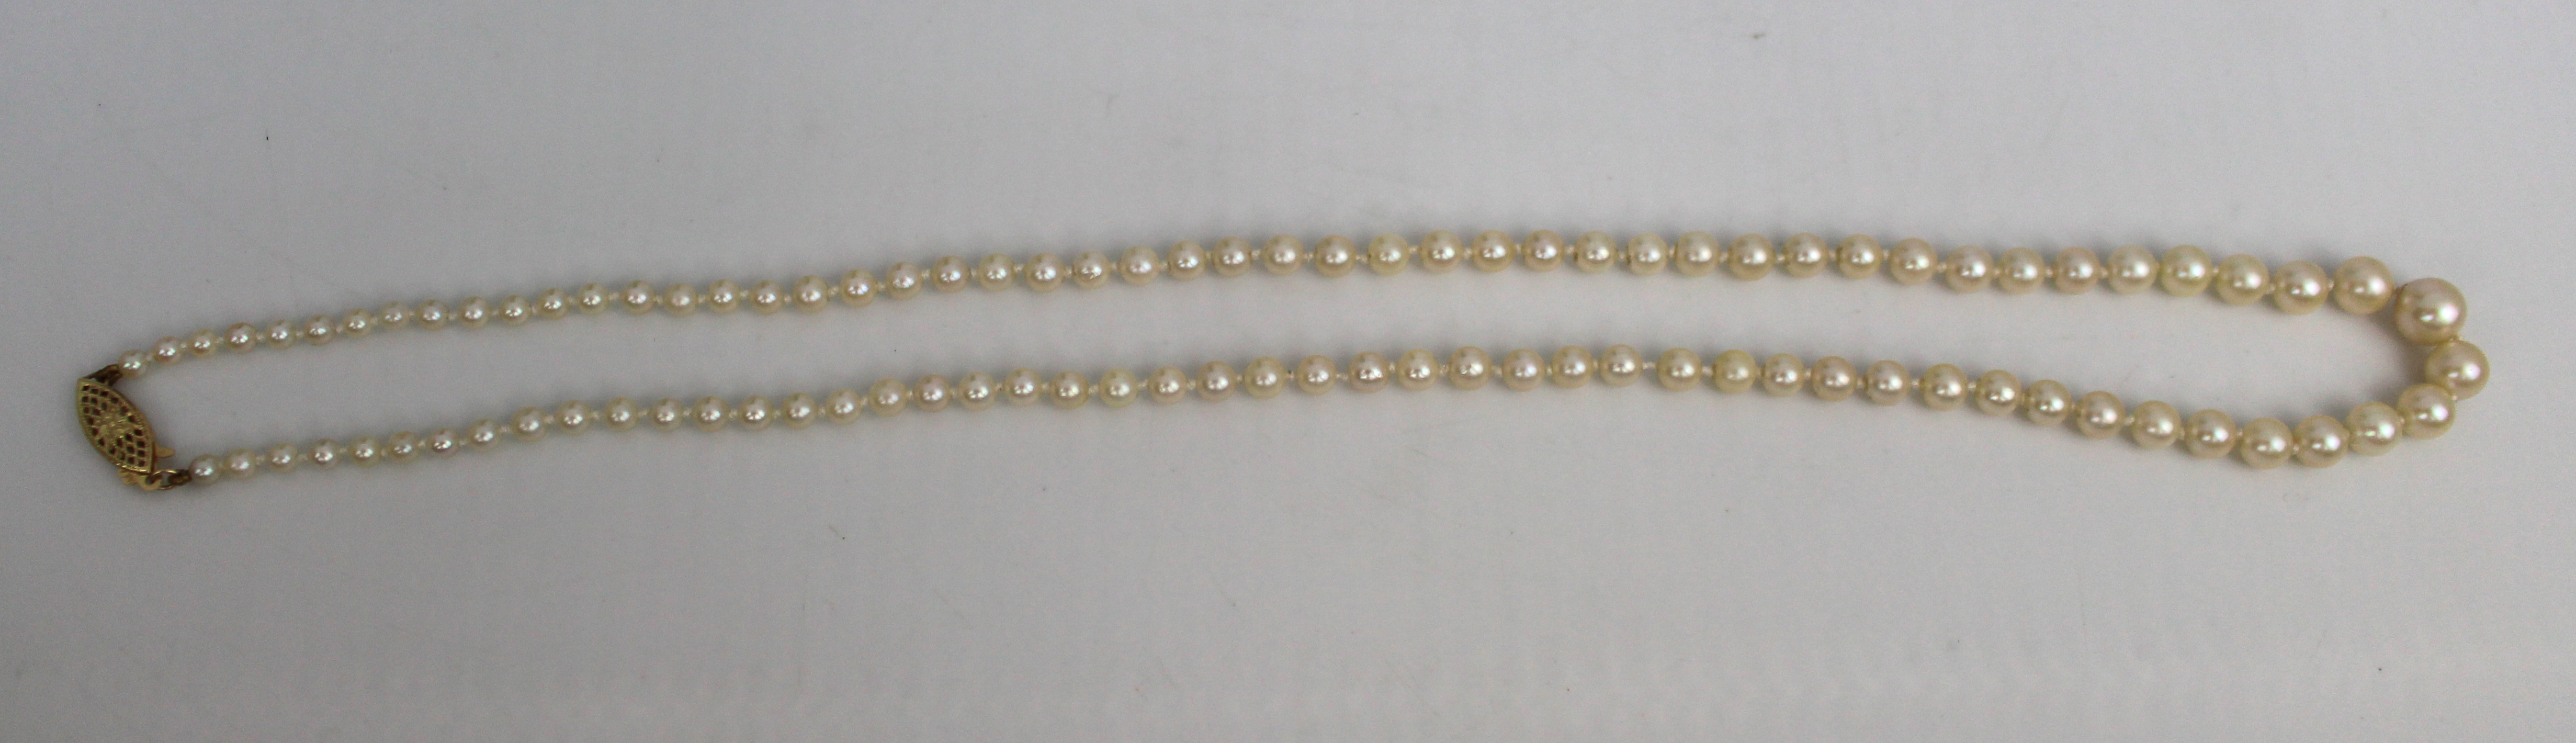 Graduated Pearl Necklace with Gold Clasp - Image 5 of 7